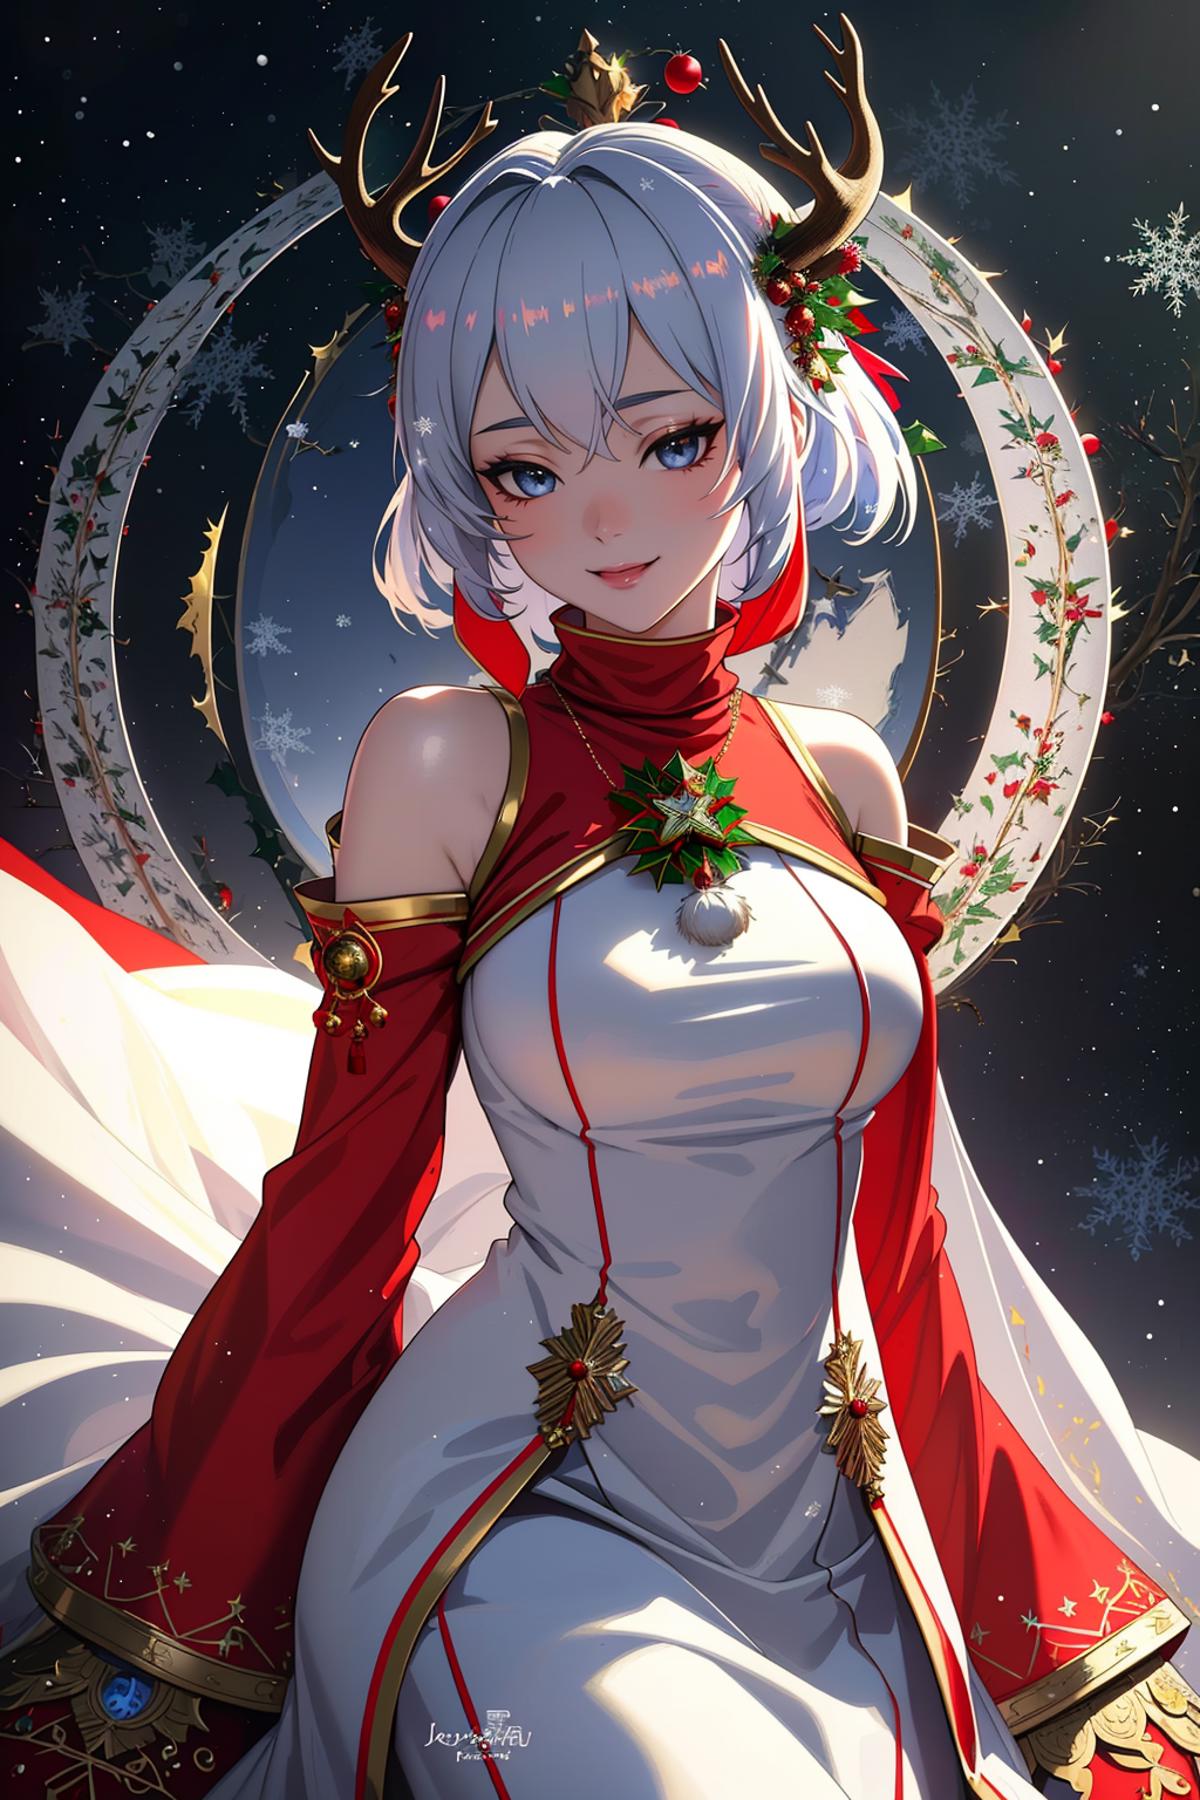 Anime Artwork of a Woman with White Hair and Blue Eyes Wearing a Red and White Dress.